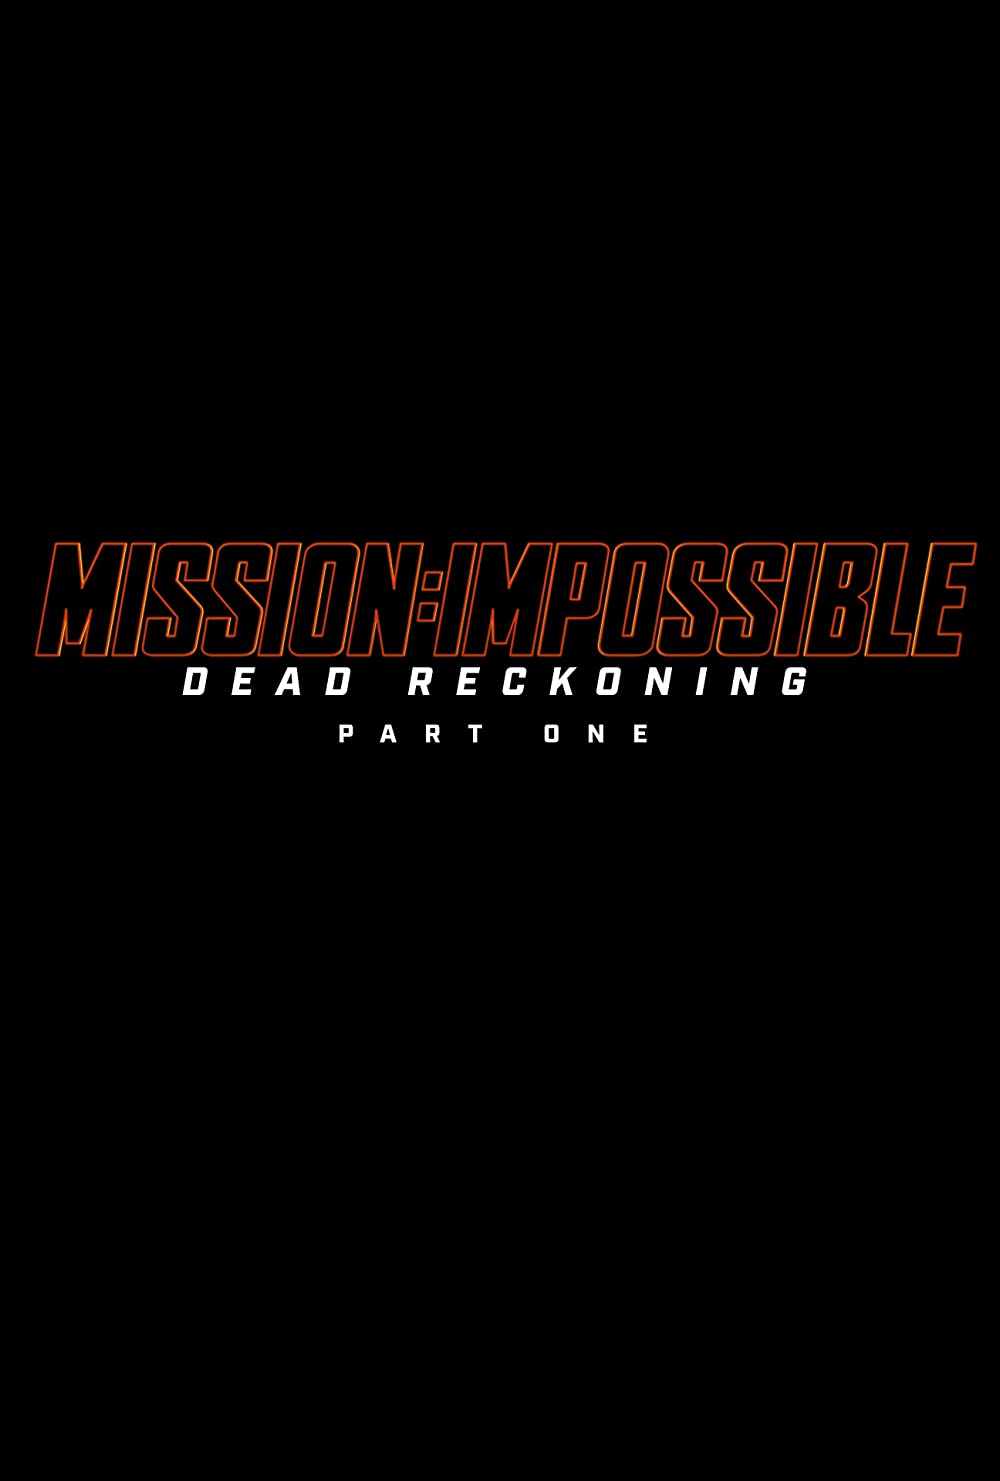 Mission Impossible Dead Reckoning Part One 2023 English Movie Official Hindi Teaser Trailer 1080p | 720p HDRip Download